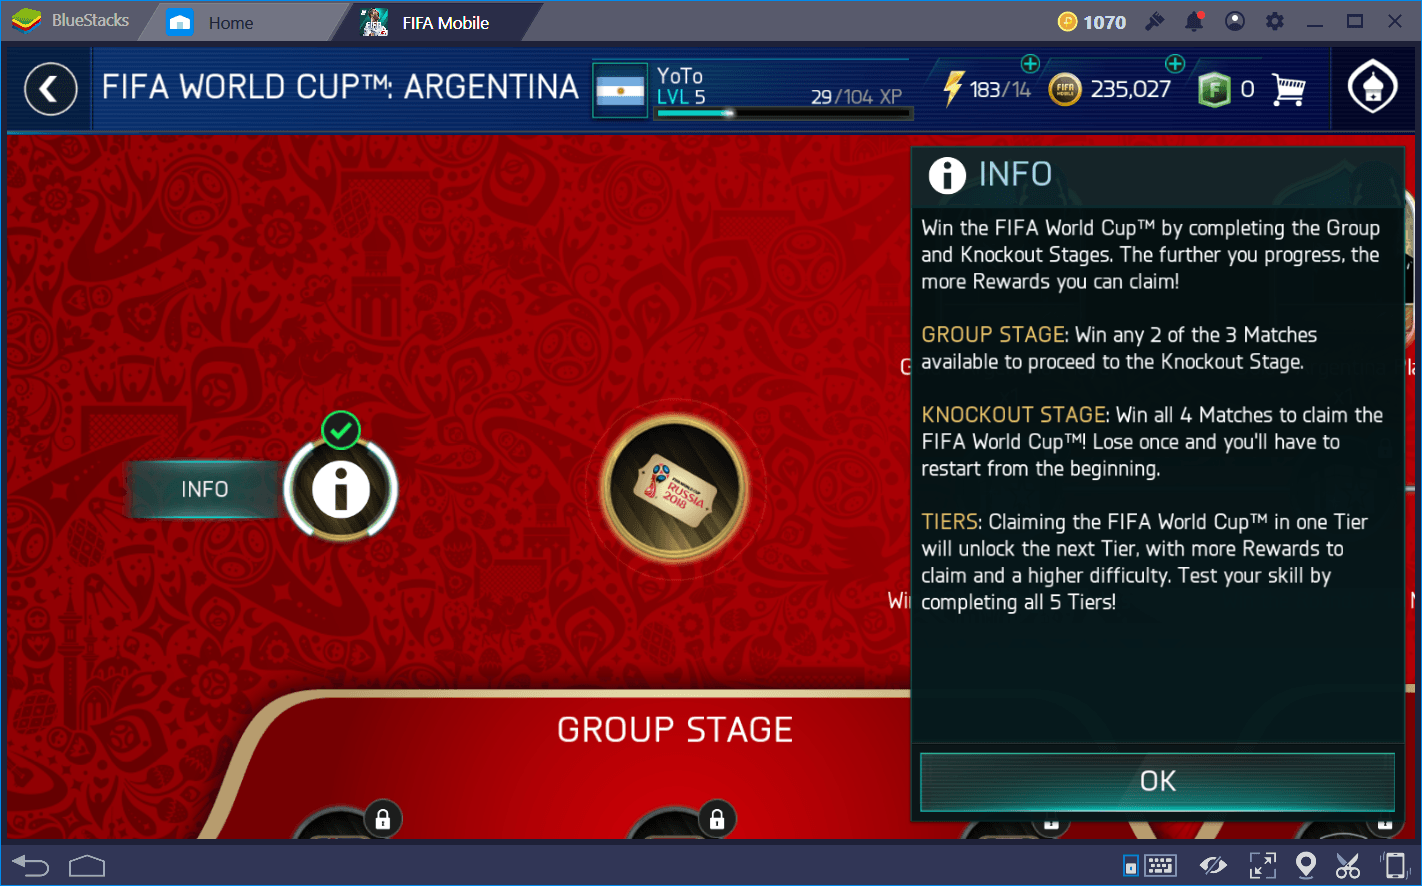 FIFA Soccer: FIFA World Cup (FIFA Mobile) Special World Cup Event Guide